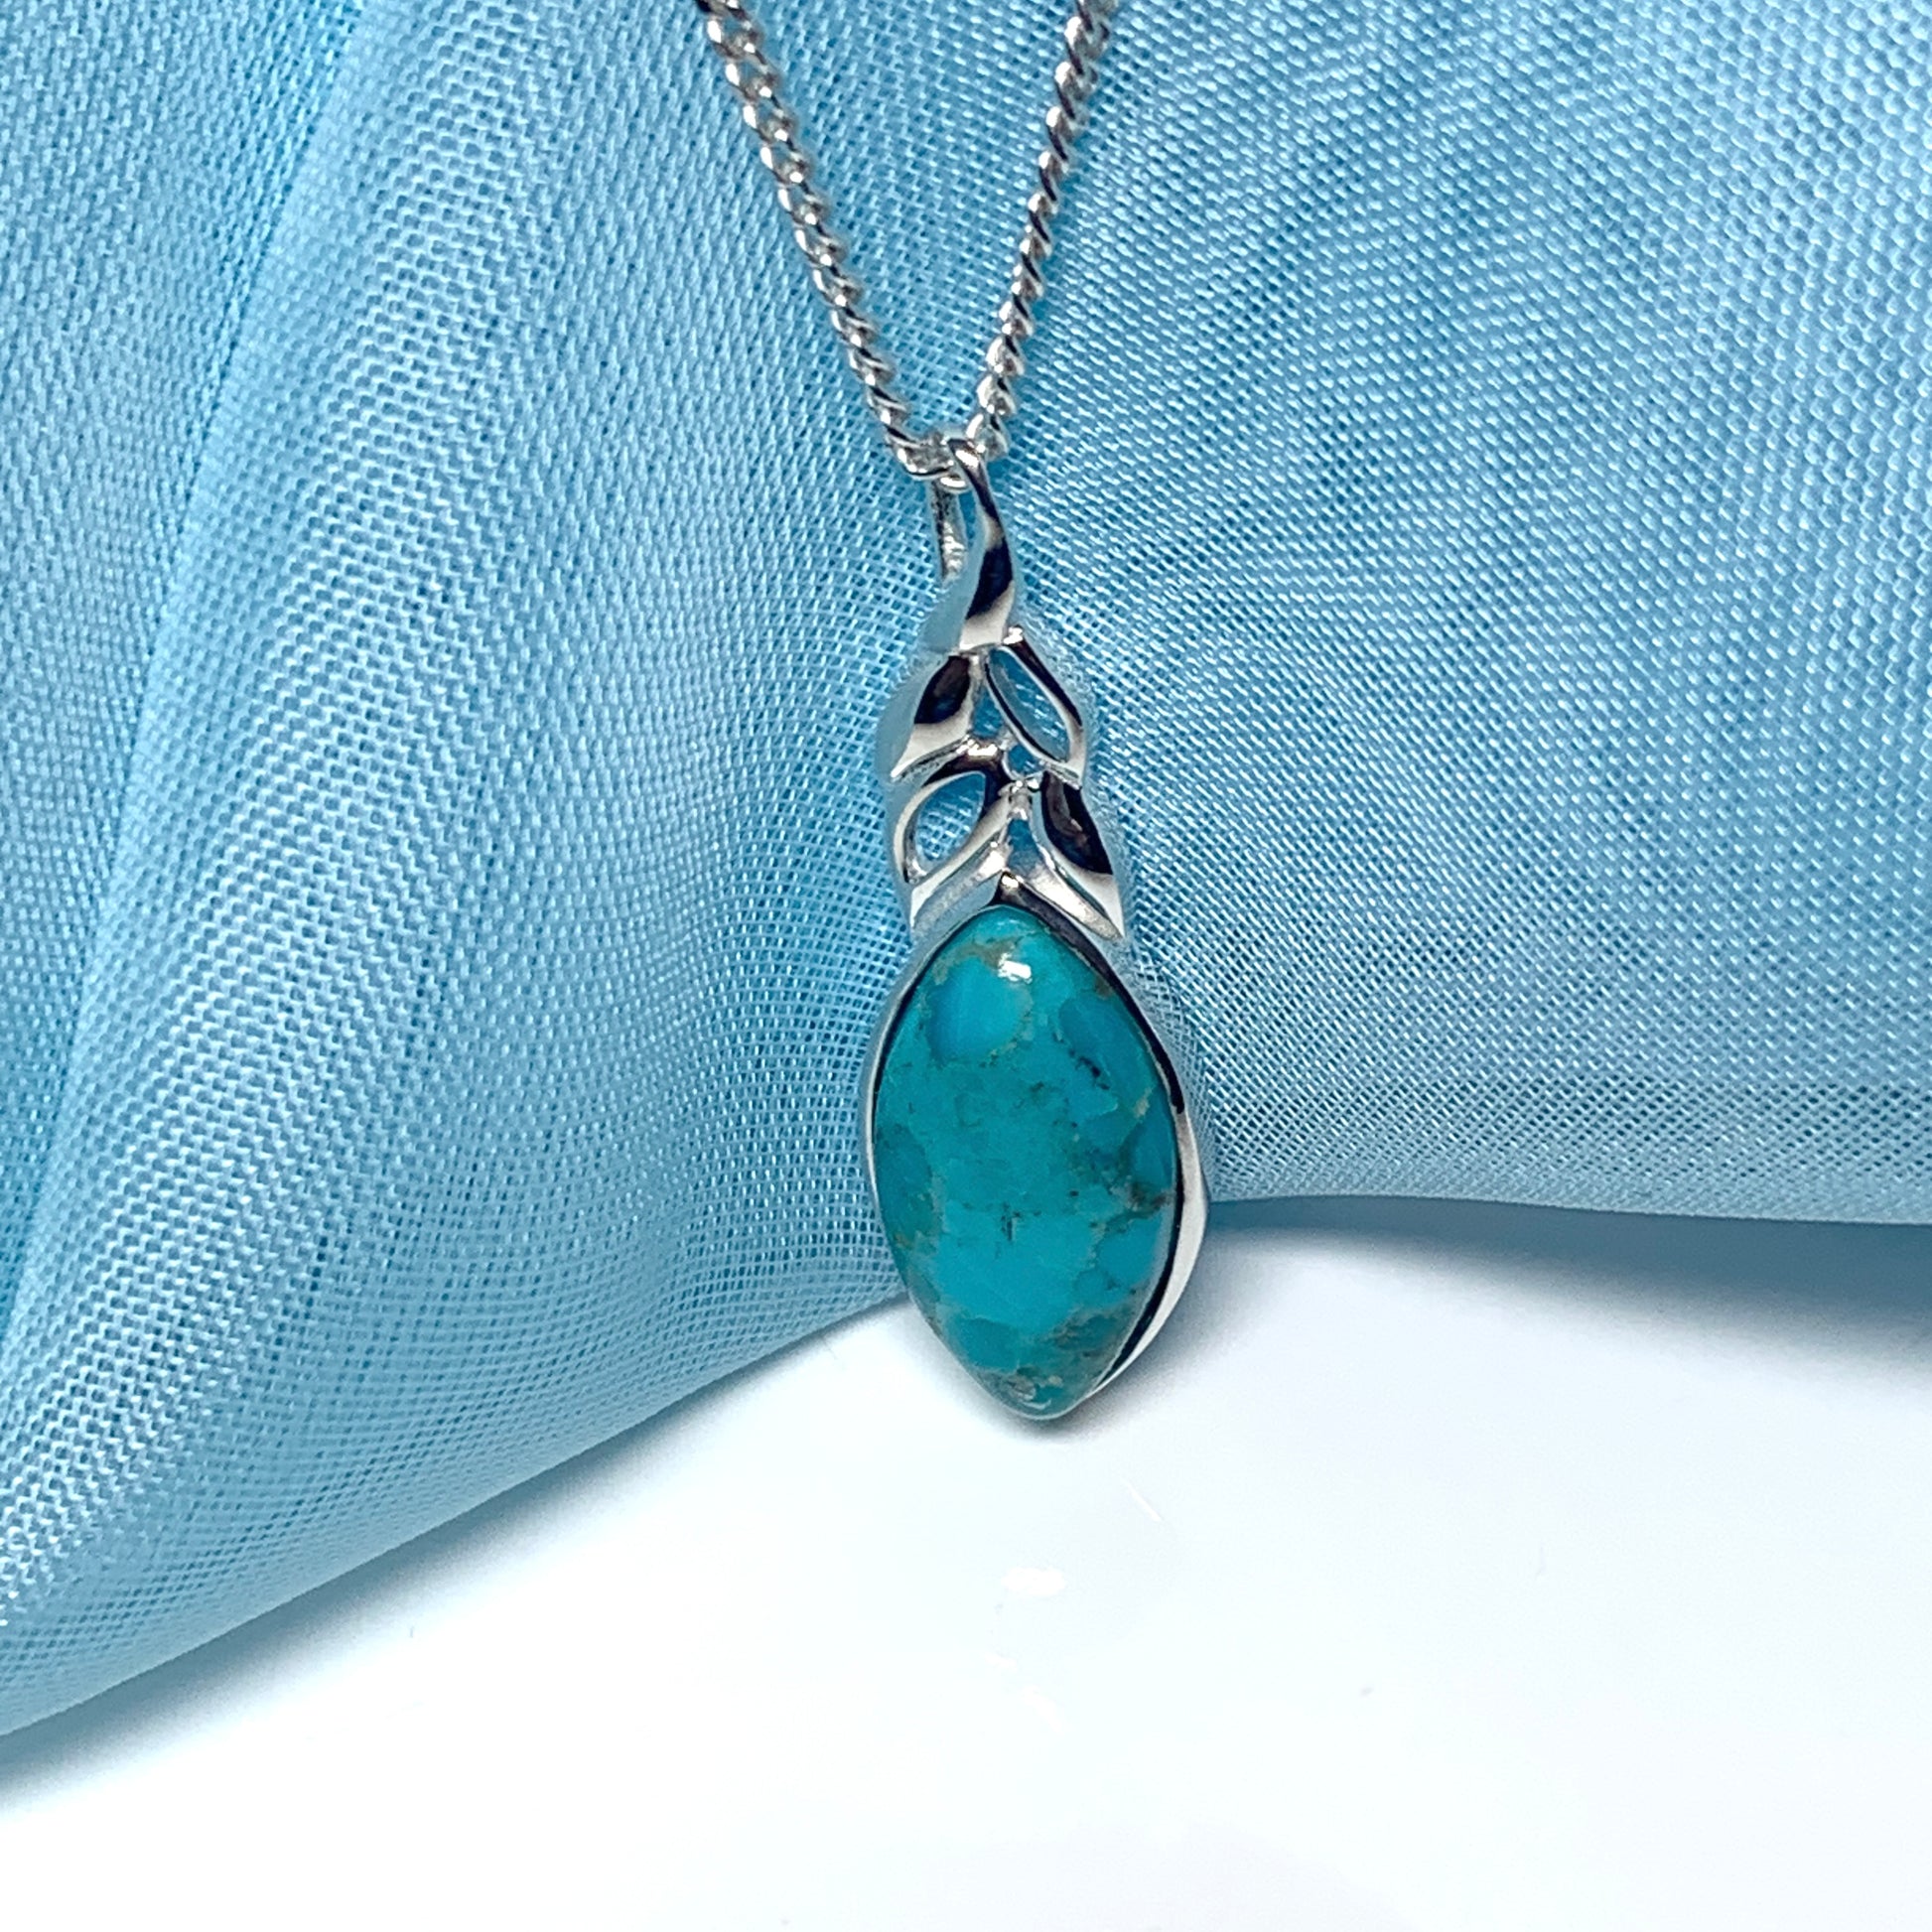 Turquoise necklace marquise cut sterling silver pendant